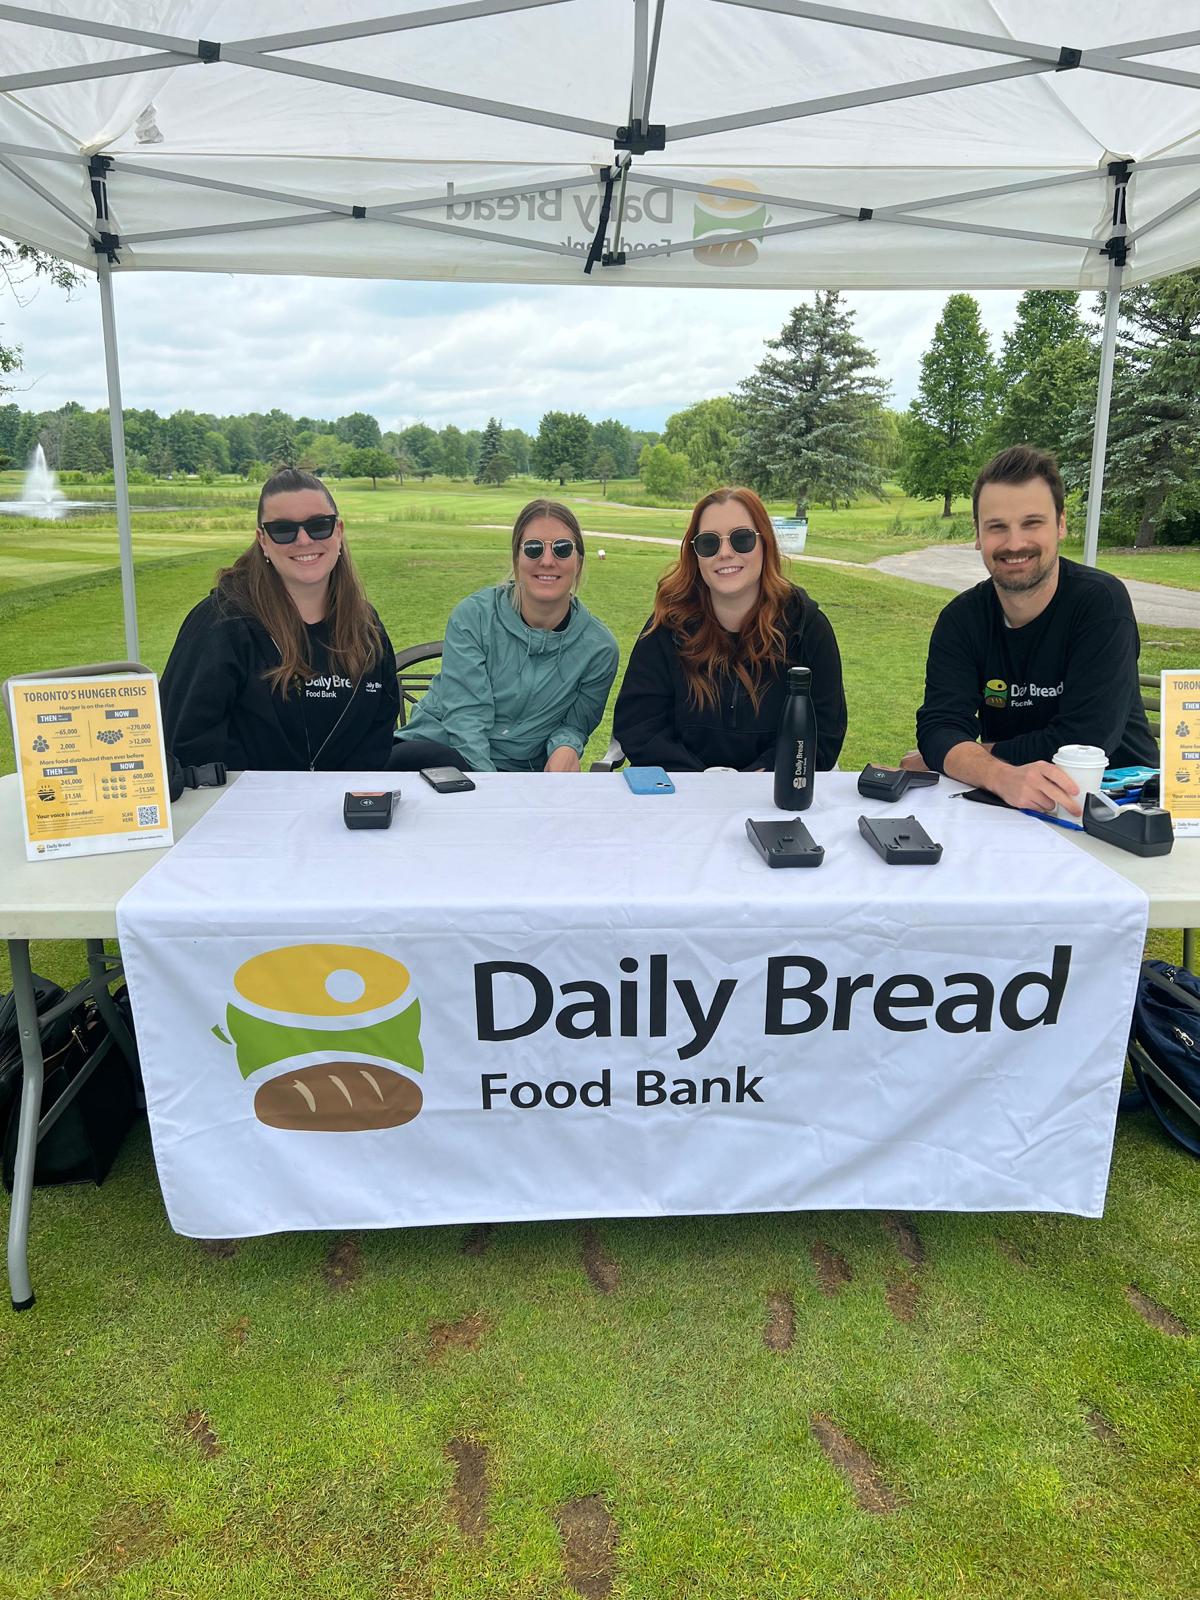 Staff members from the Daily Bread Food Bank set up a fundraising booth at the Golf Tournament